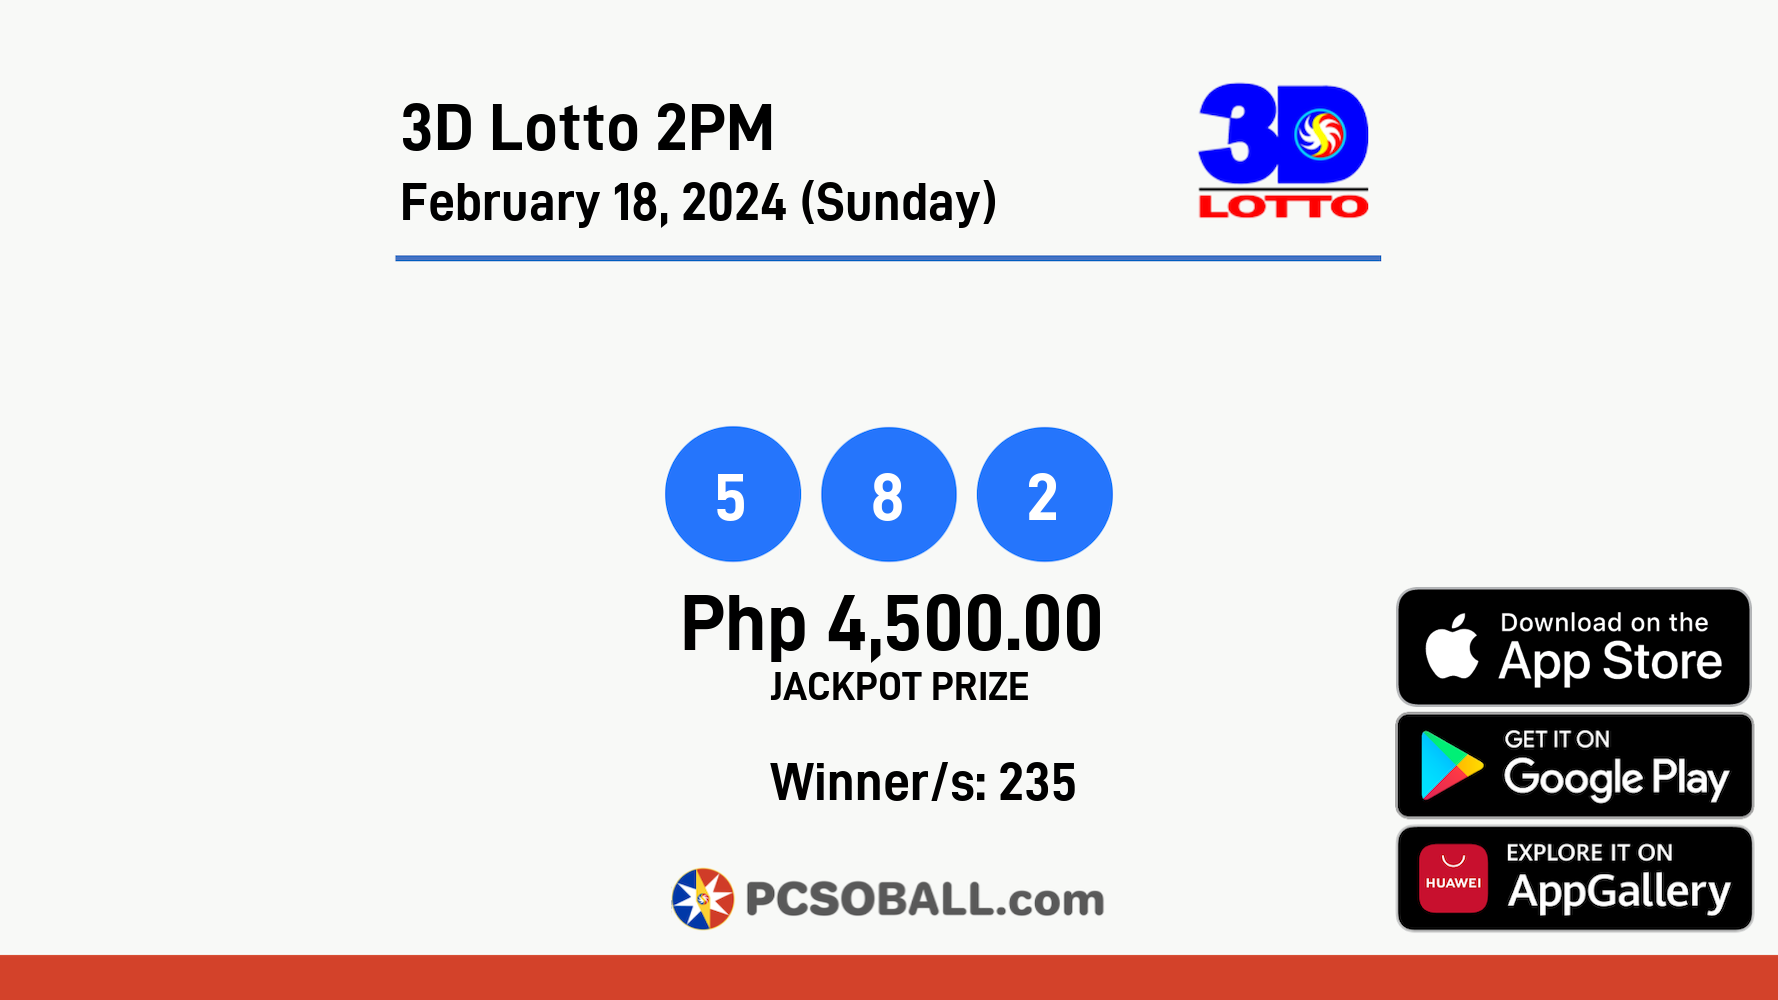 3D Lotto 2PM February 18, 2024 (Sunday) Result